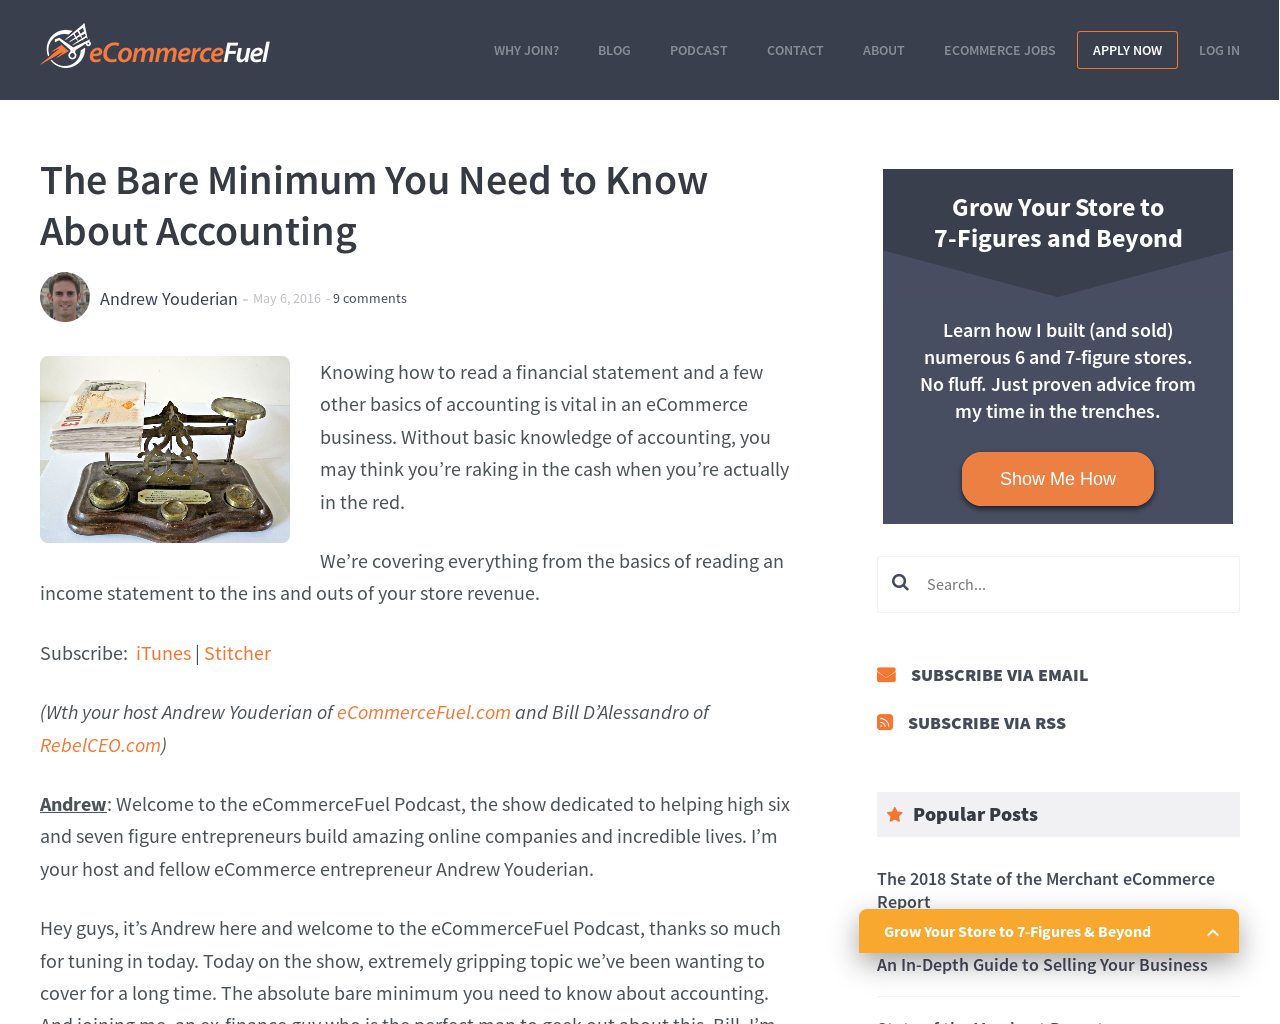 Guide: The Bare Minimum You Need to Know About Accounting